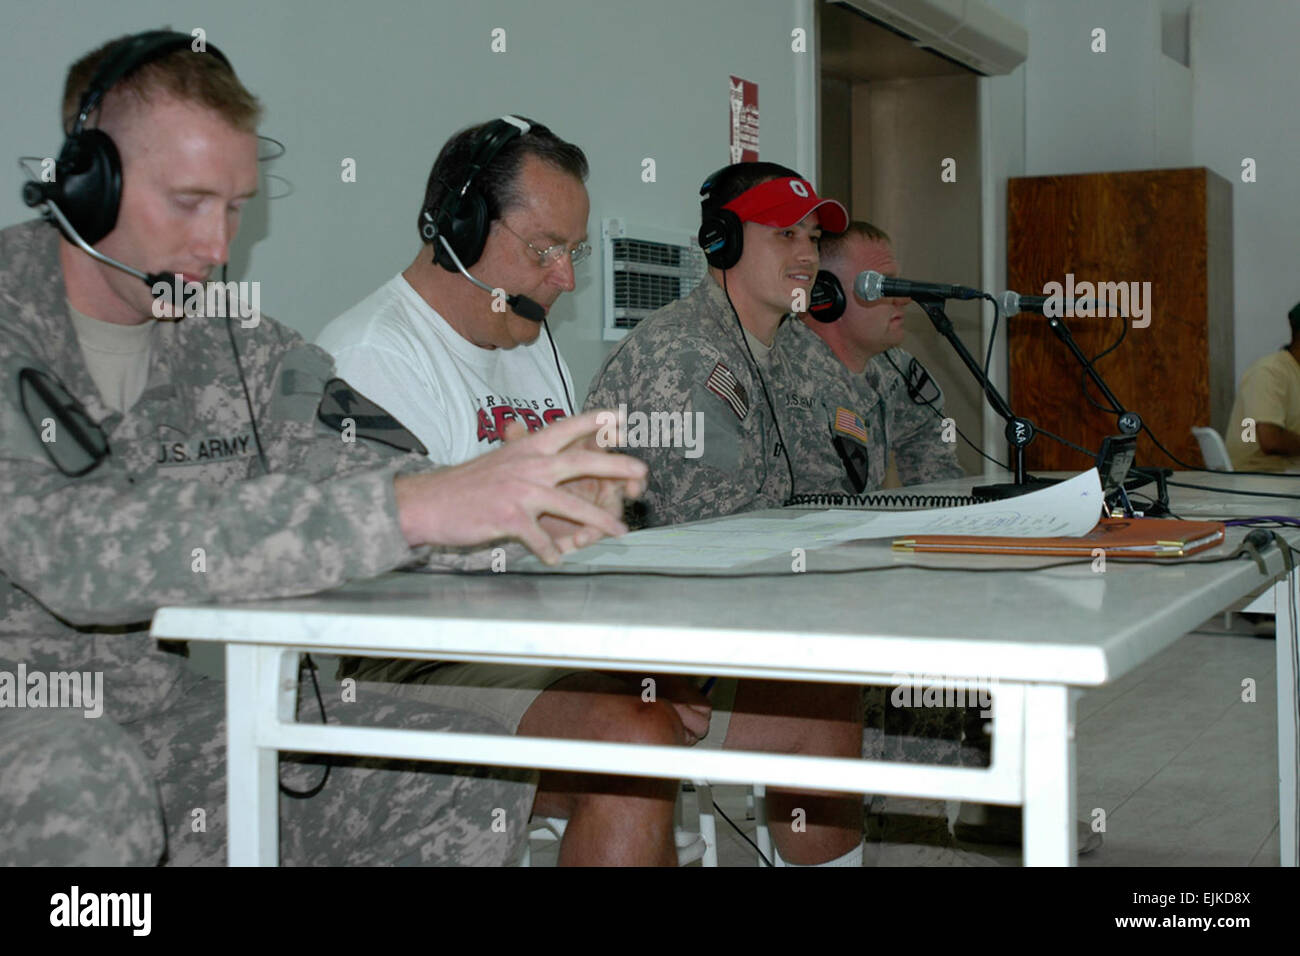 2nd Lt. Charlie Rockwood with Headquarters Troop, 1st Cavalry Division, Capt. Josh Holden with 2nd Battalion, 82nd Field Artillery Regiment, and Sgt. Patrick Miller, with 1st Battalion 12th Cavalry Regiment participate in a live radio broadcast with sports talk radio host Ron Barr second from left. The syndicated national U.S. sports talk show, Sports Byline, was broadcast from the Forward Operating Base Marez dining facility July 14.          Sports Byline radio show comes to Mosul  /-news/2009/07/15/24429-sports-byline-radio-show-comes-to-mosul/?ref=home-headline-title6 Stock Photo